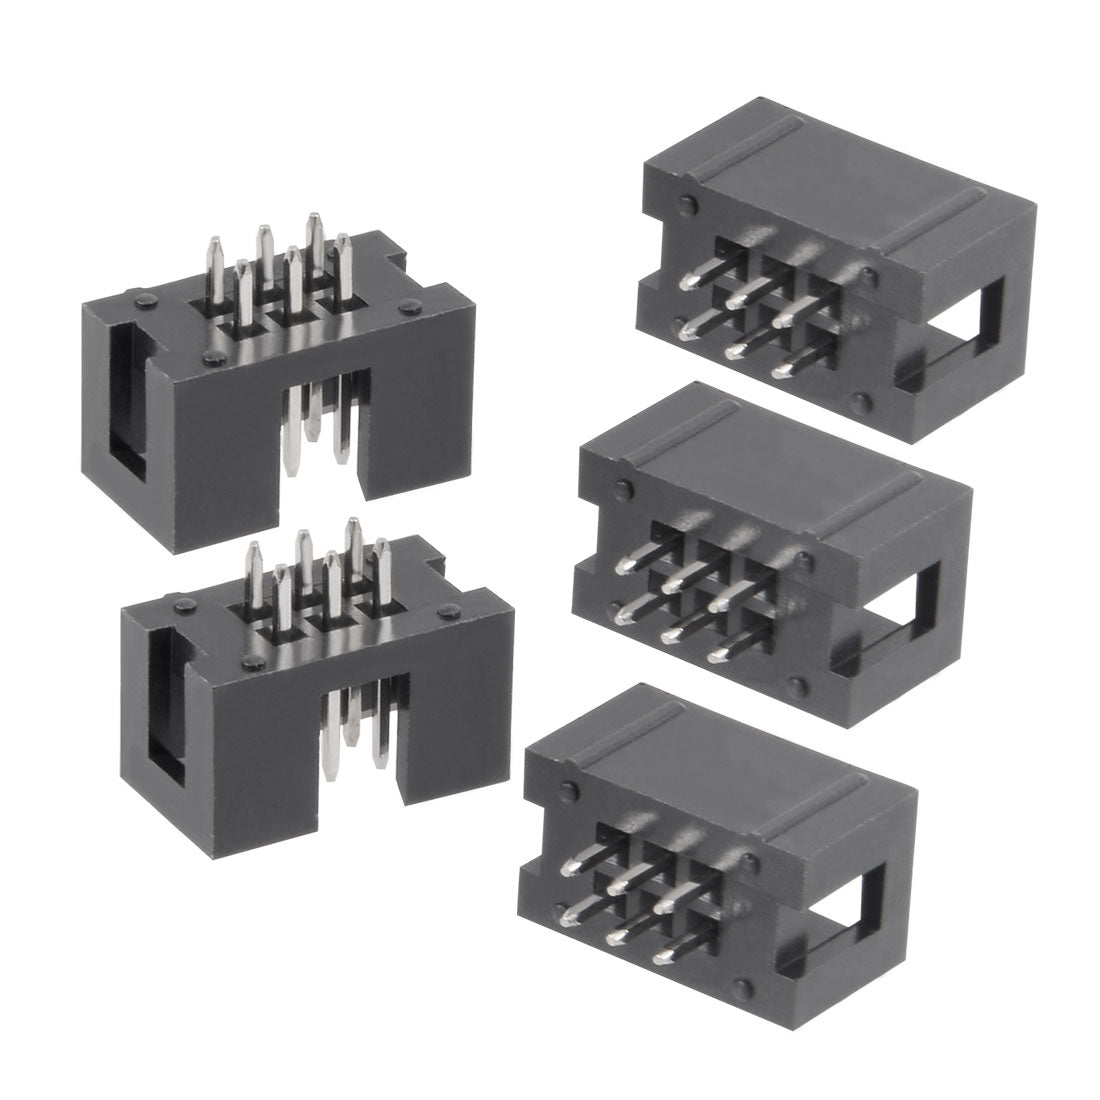 uxcell Uxcell 20Pcs 2.54mm Pitch 2x3-Pin Double Row Straight Box Header Connector PCB Board Socket